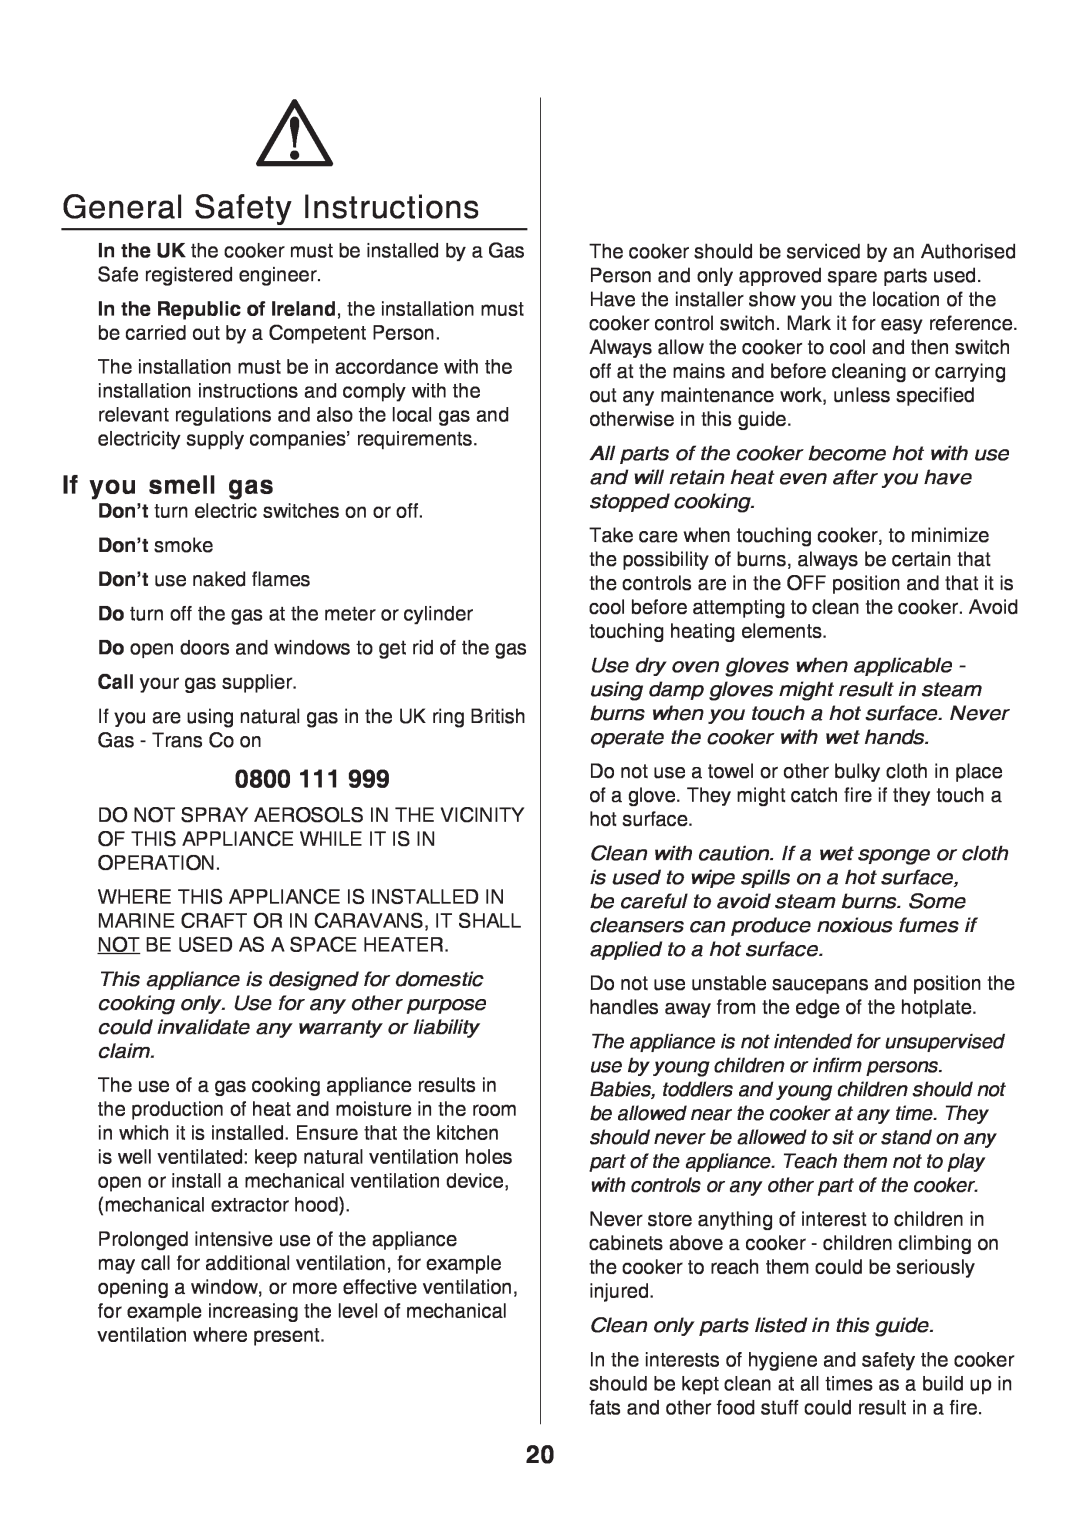 Rangemaster U106140-05 manual General Safety Instructions, If you smell gas, 0800, Don’t smoke 